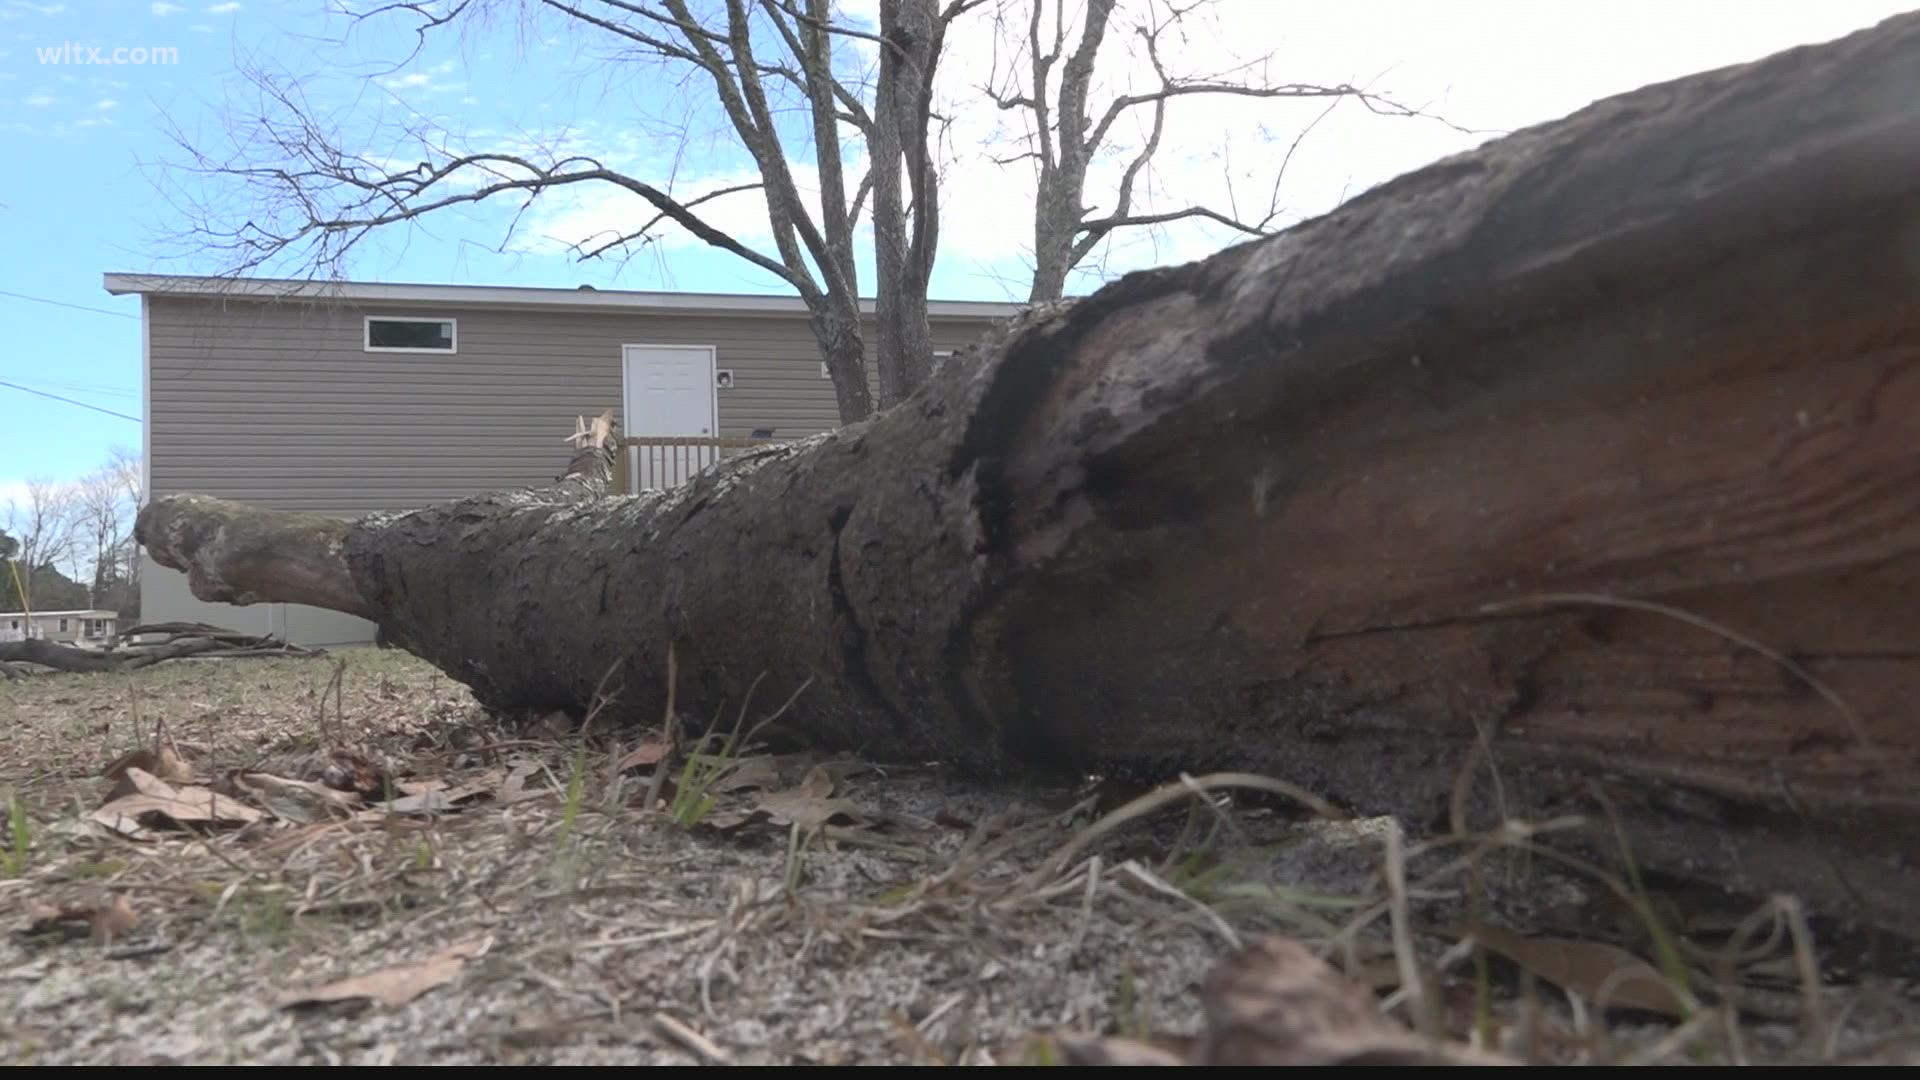 He put out a note that he needed wood and now neighbors are working to make that happen.